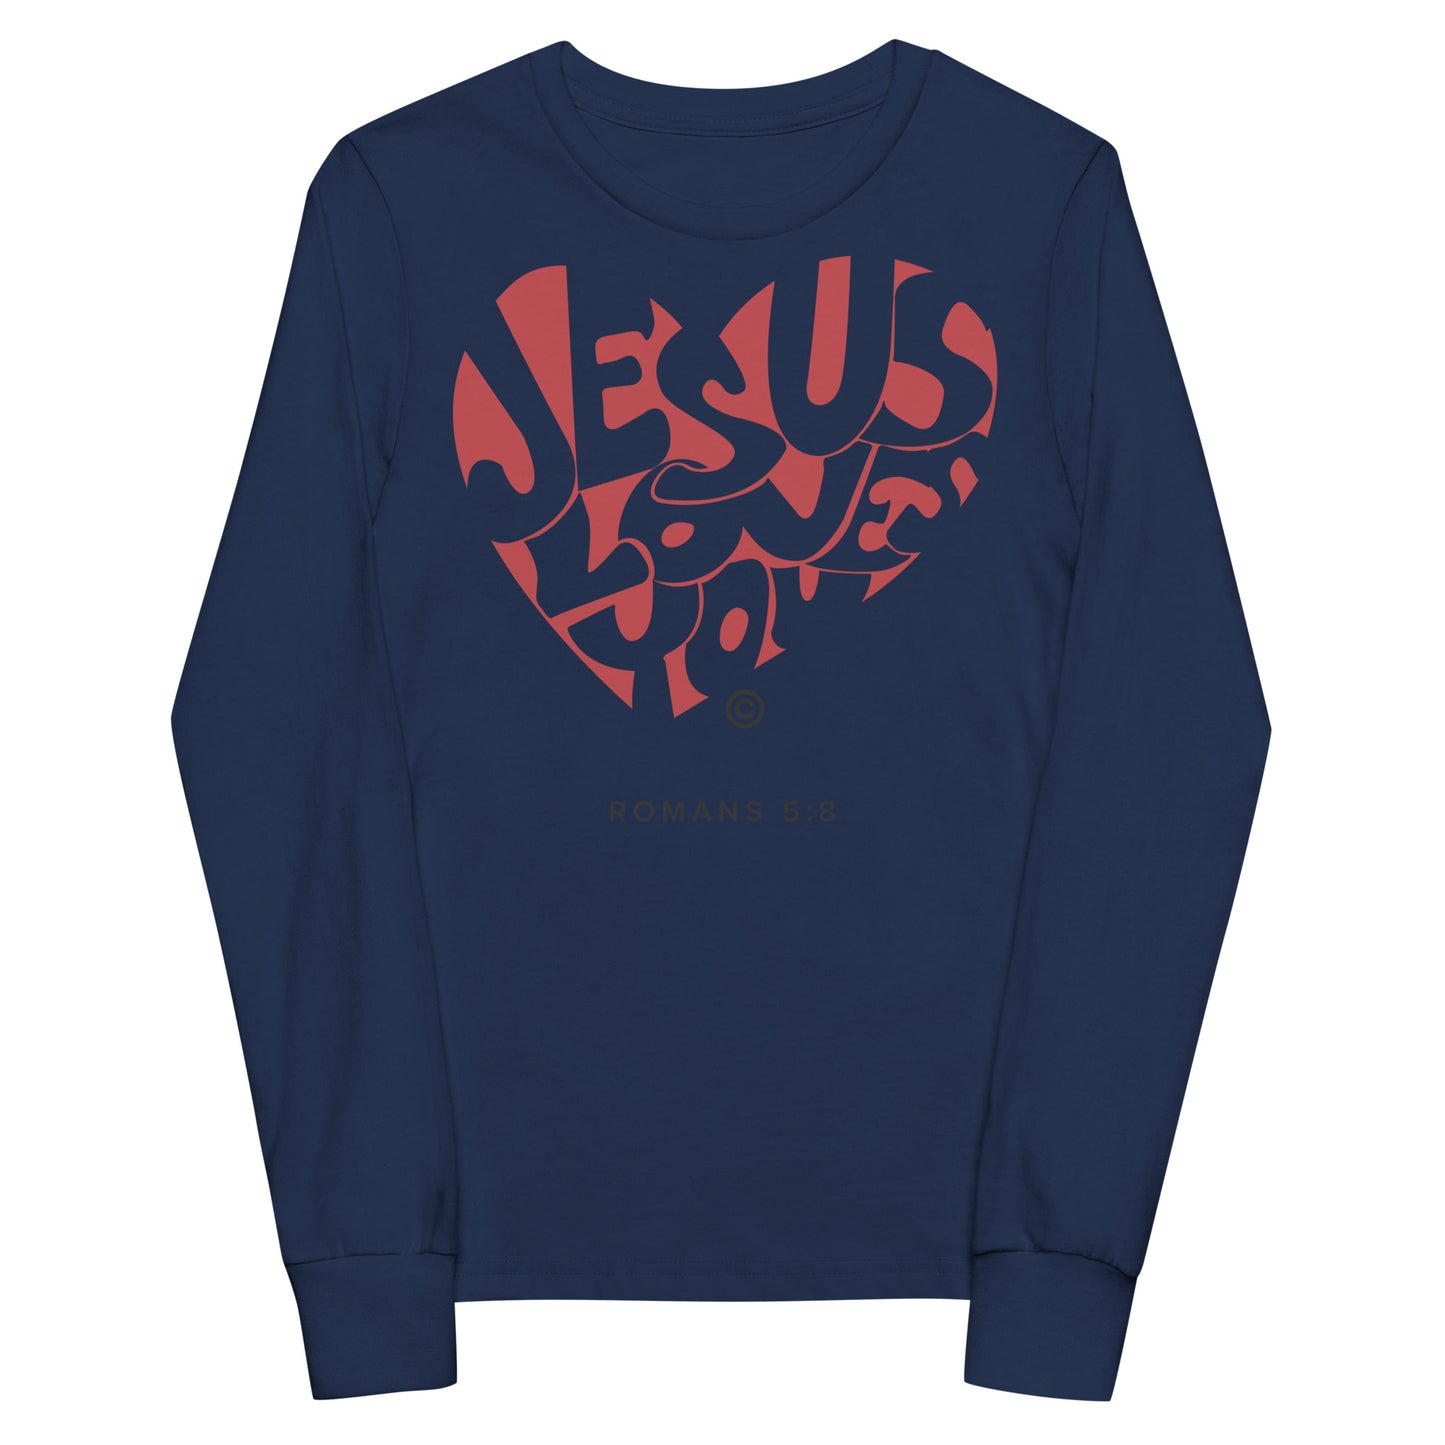 Jesus Loves You Youth Long Sleeve Tee